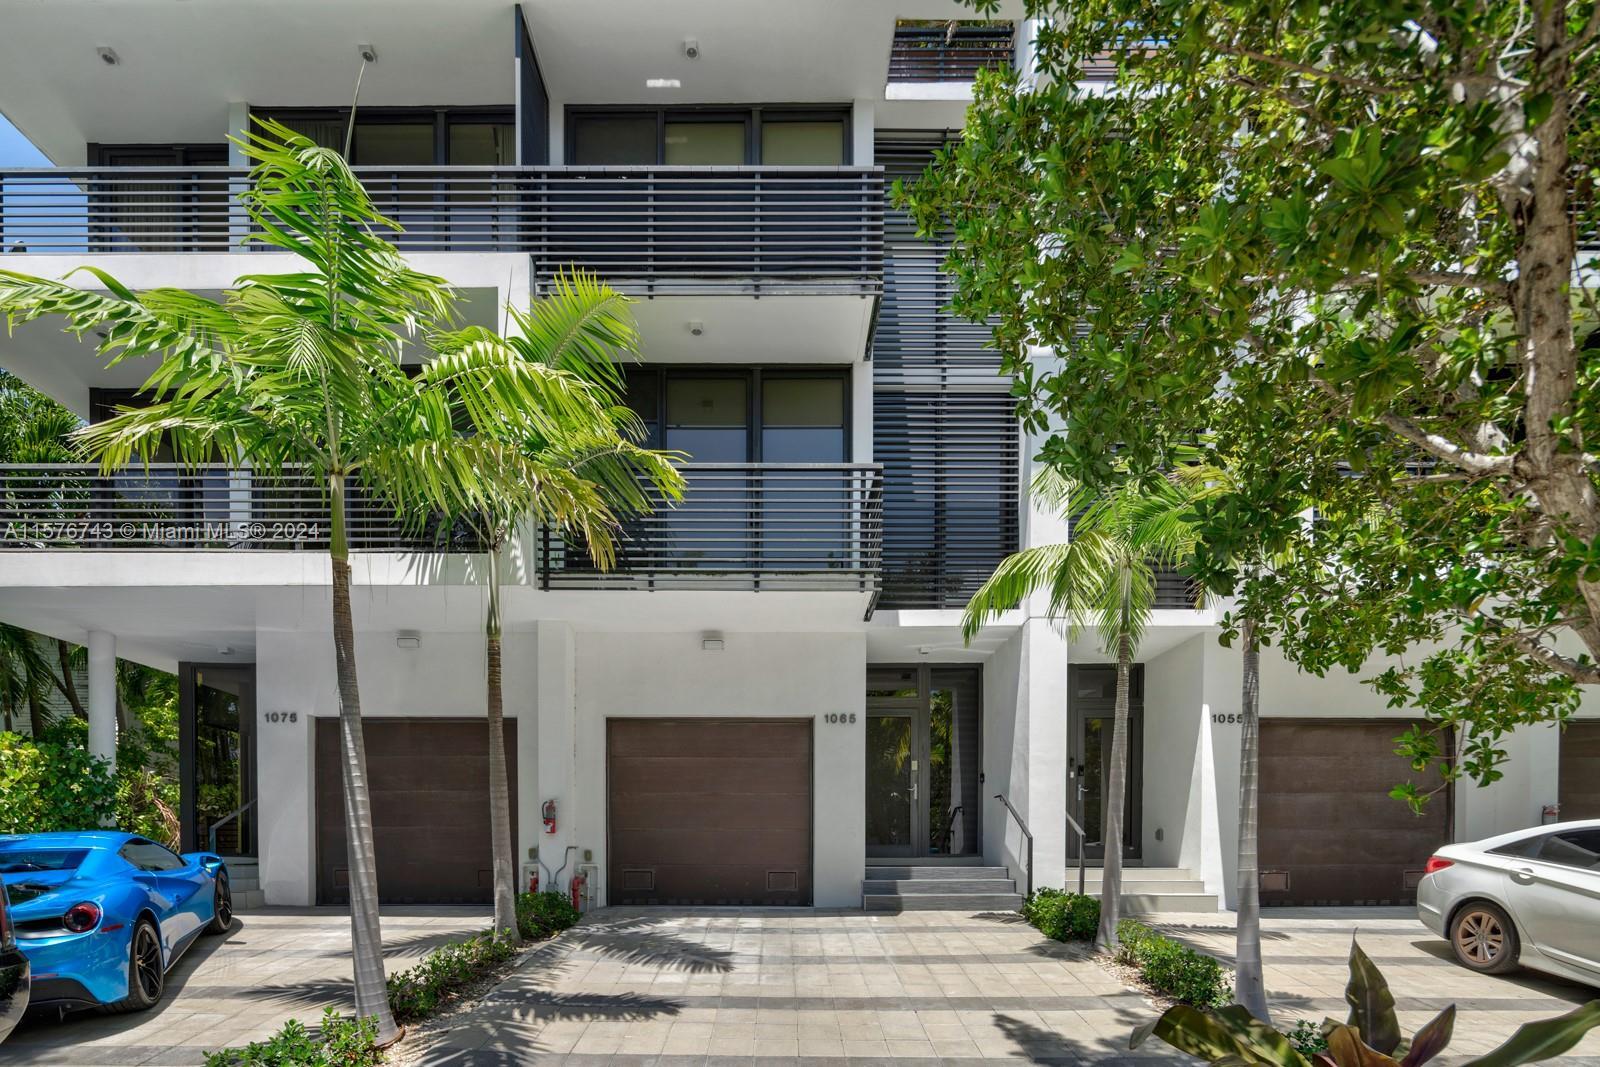 This stunning luxury townhome located in the heart of Miami’s ultra desirable Bay Harbor Island, is 